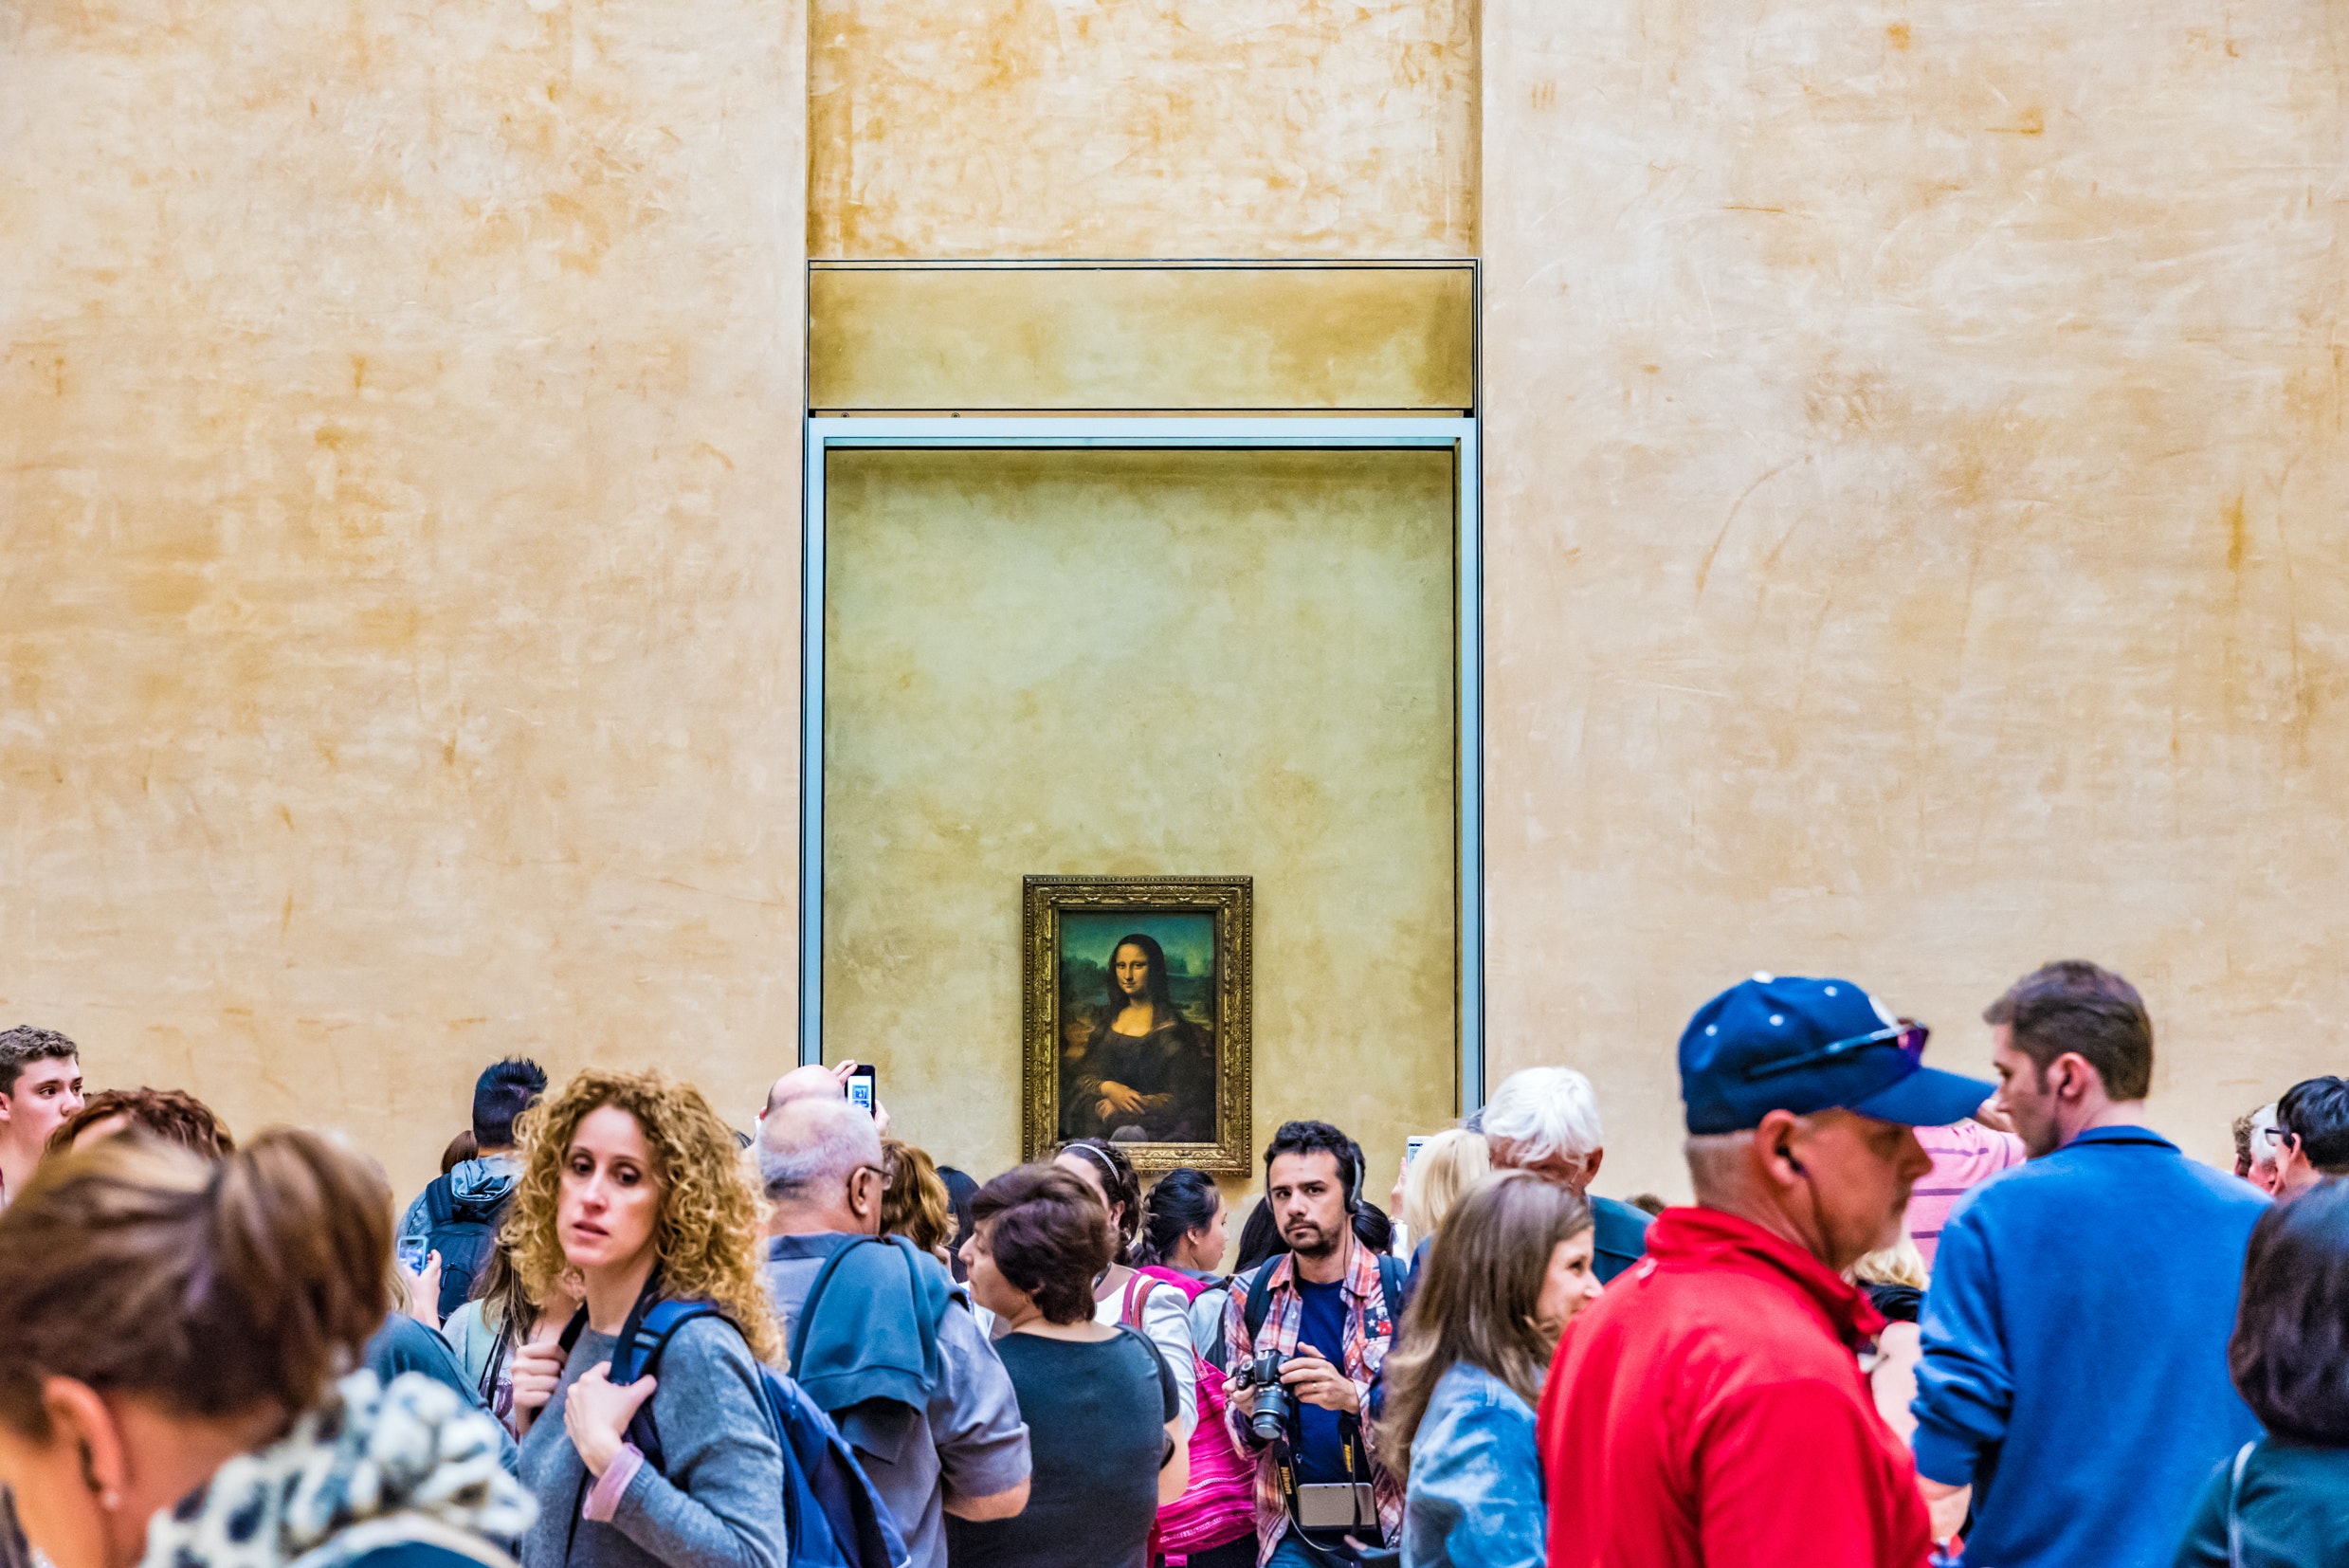 The famous Hekking Mona Lisa for sale